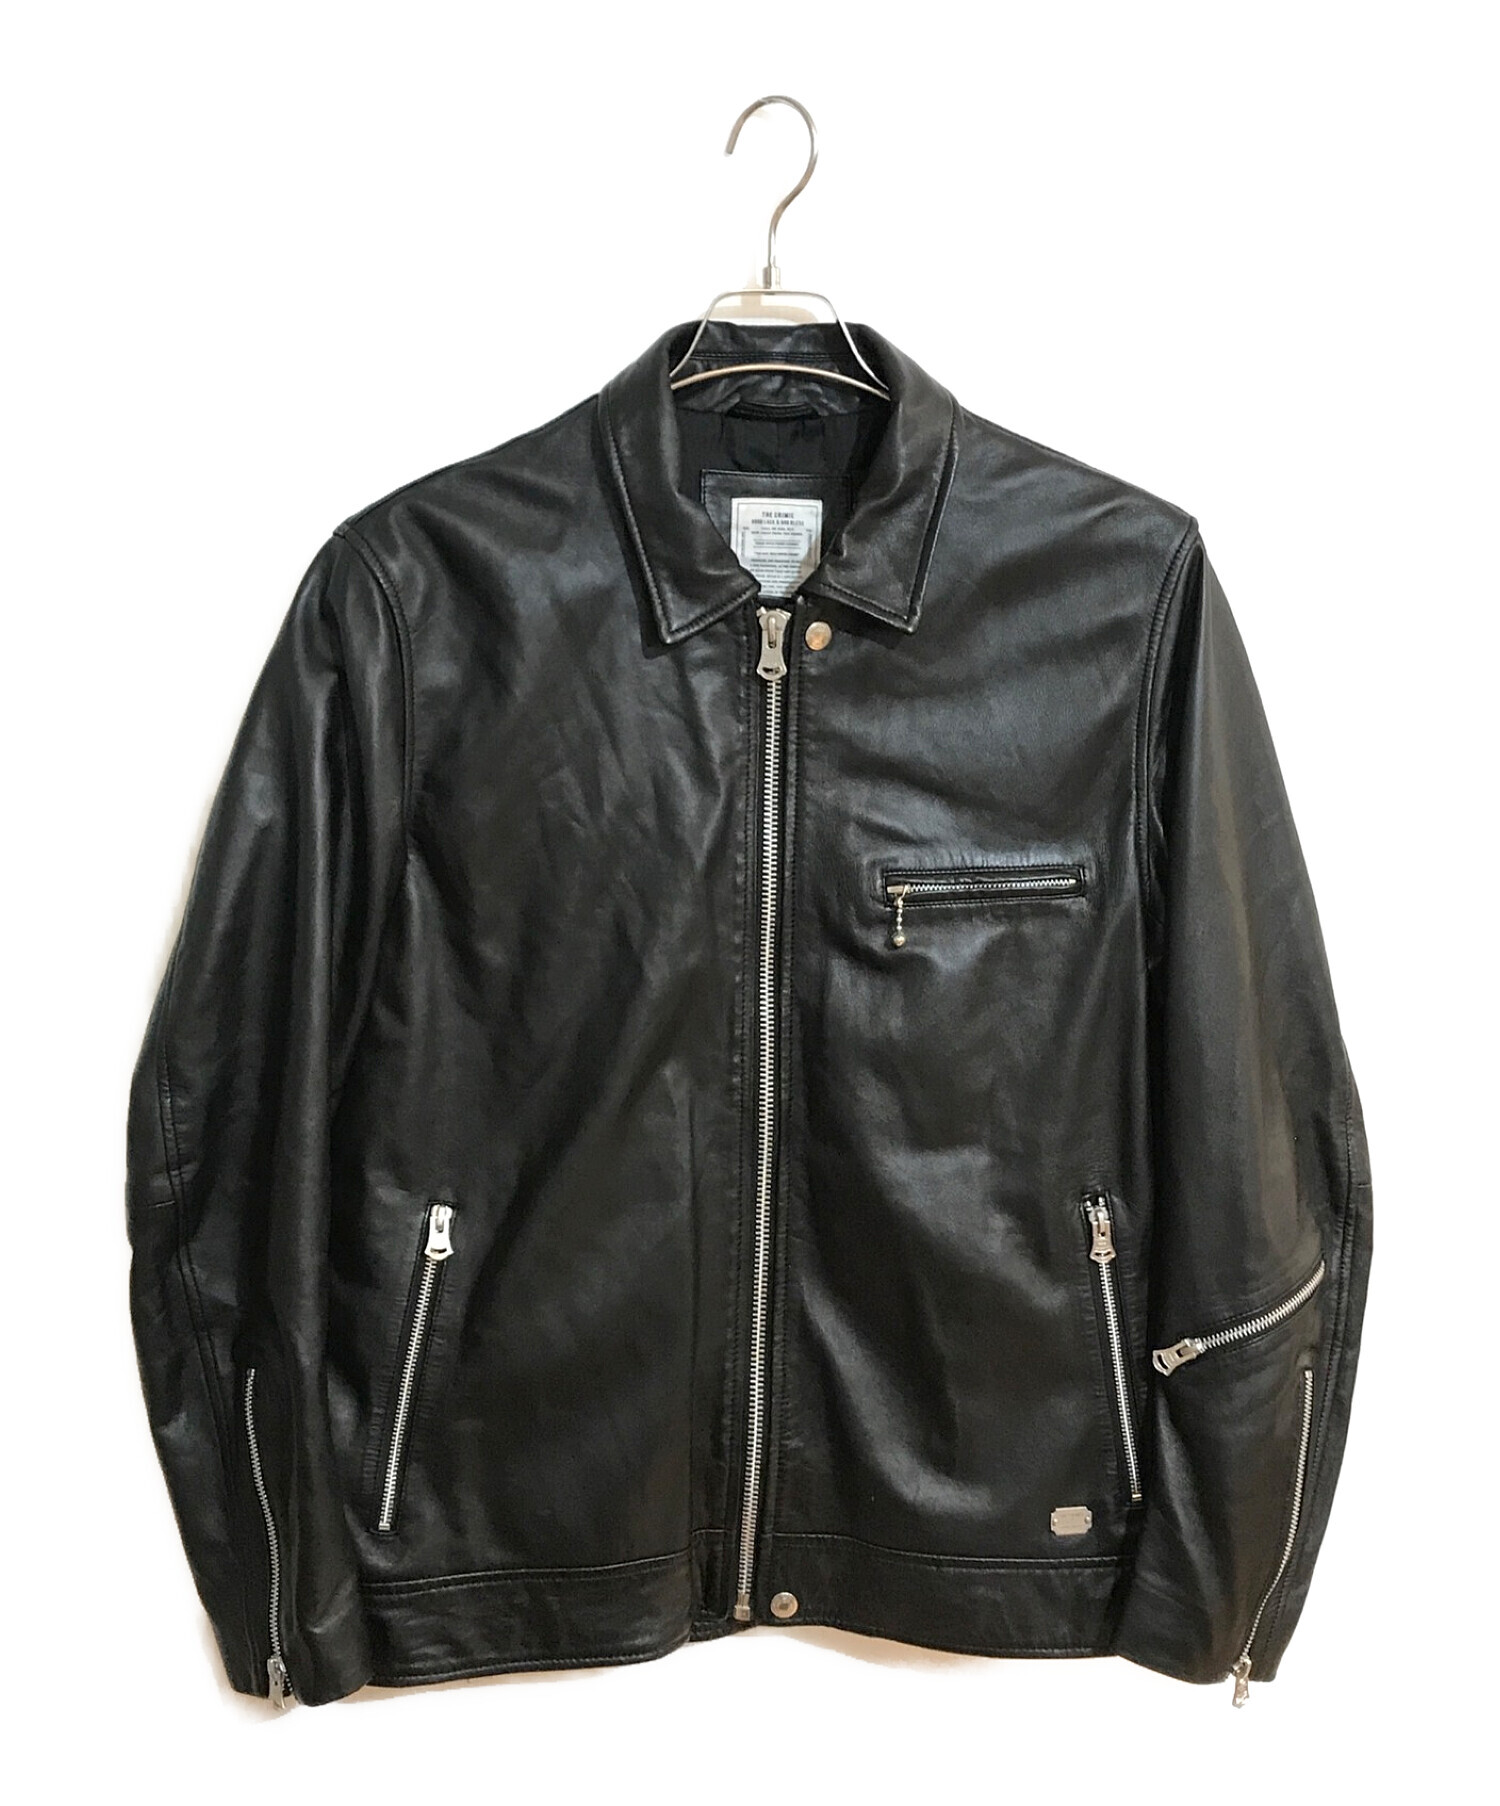 CRIME SINGLE RIDERS JACKET | www.trevires.be